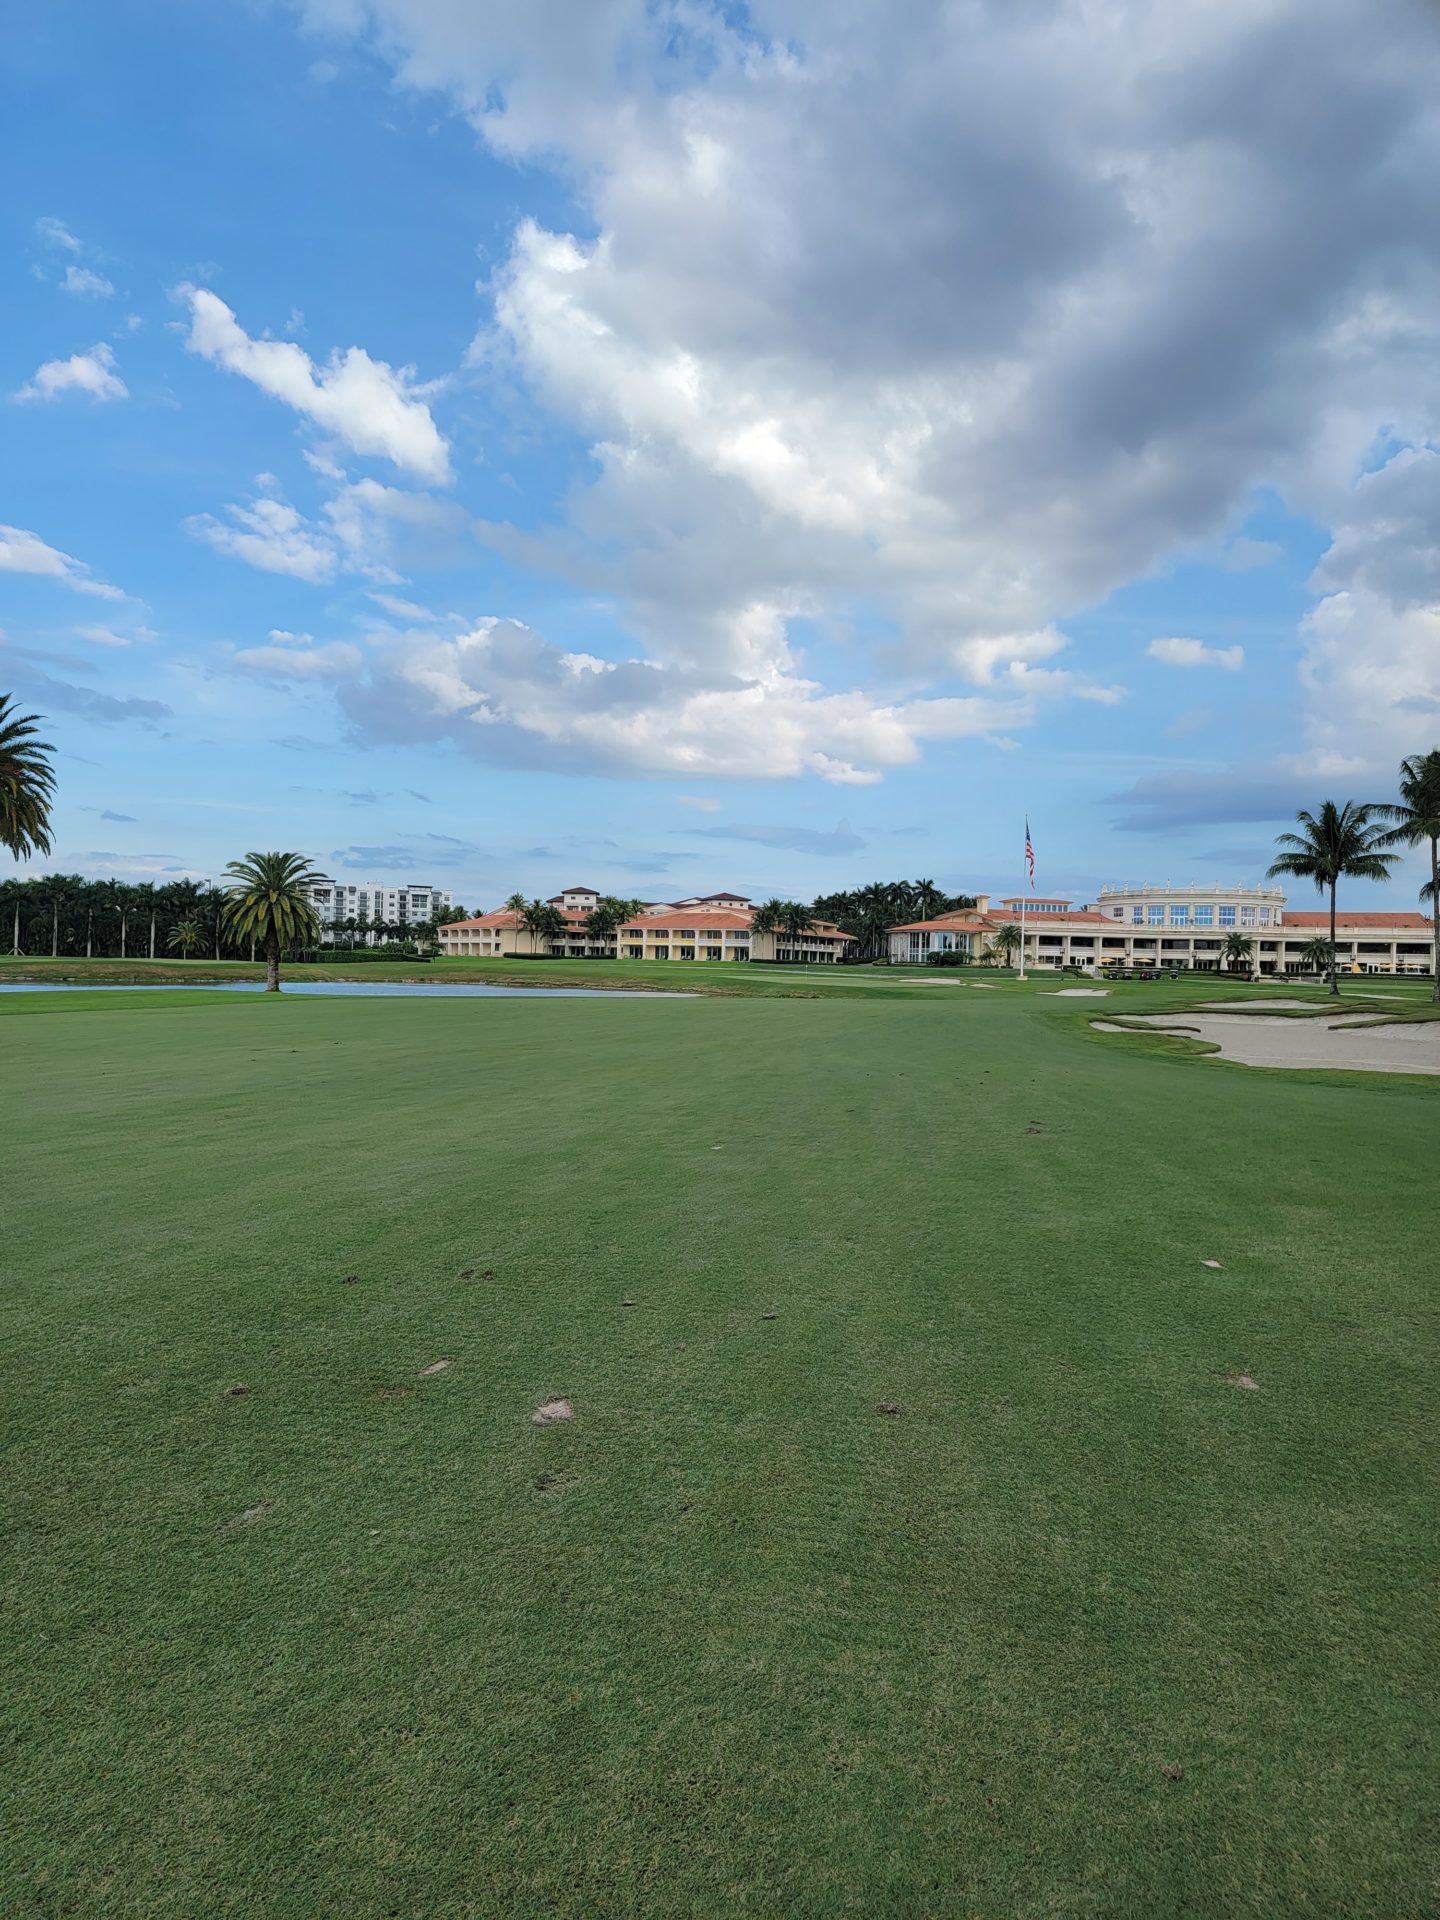 a golf course with a large green field and palm trees